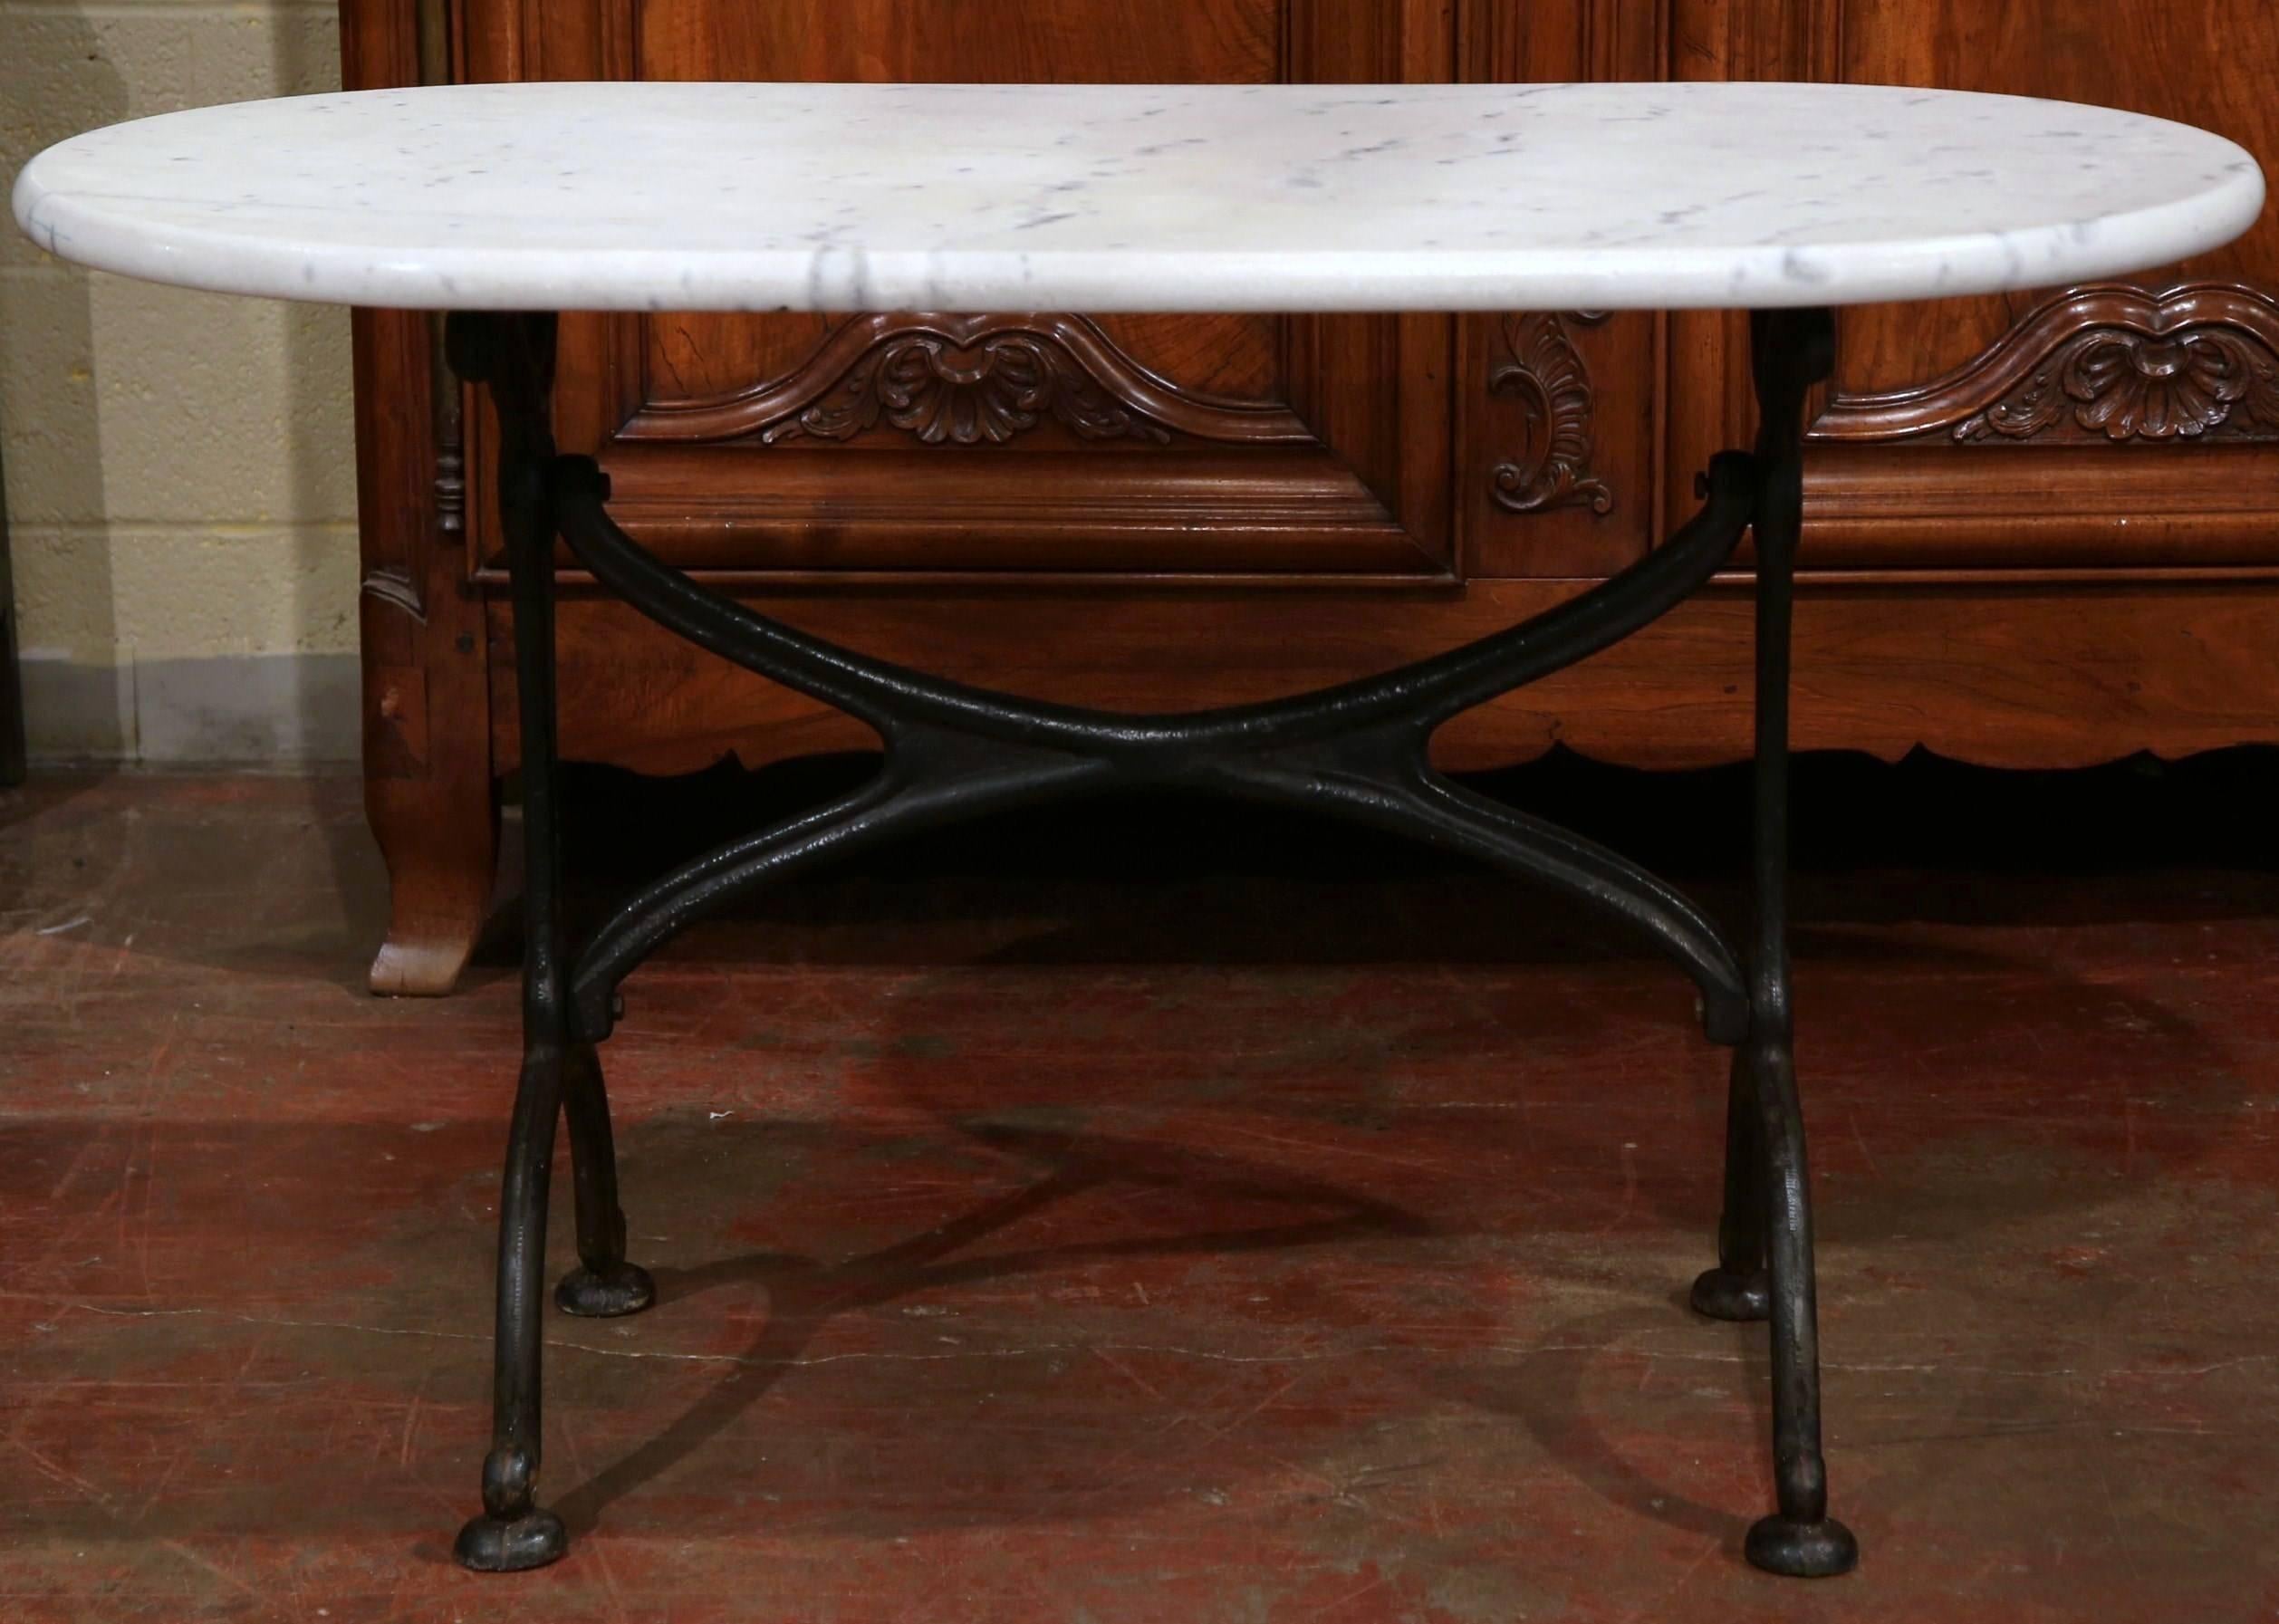 Blackened Early 20th Century French Iron and Marble Oval Bistrot Table from Paris